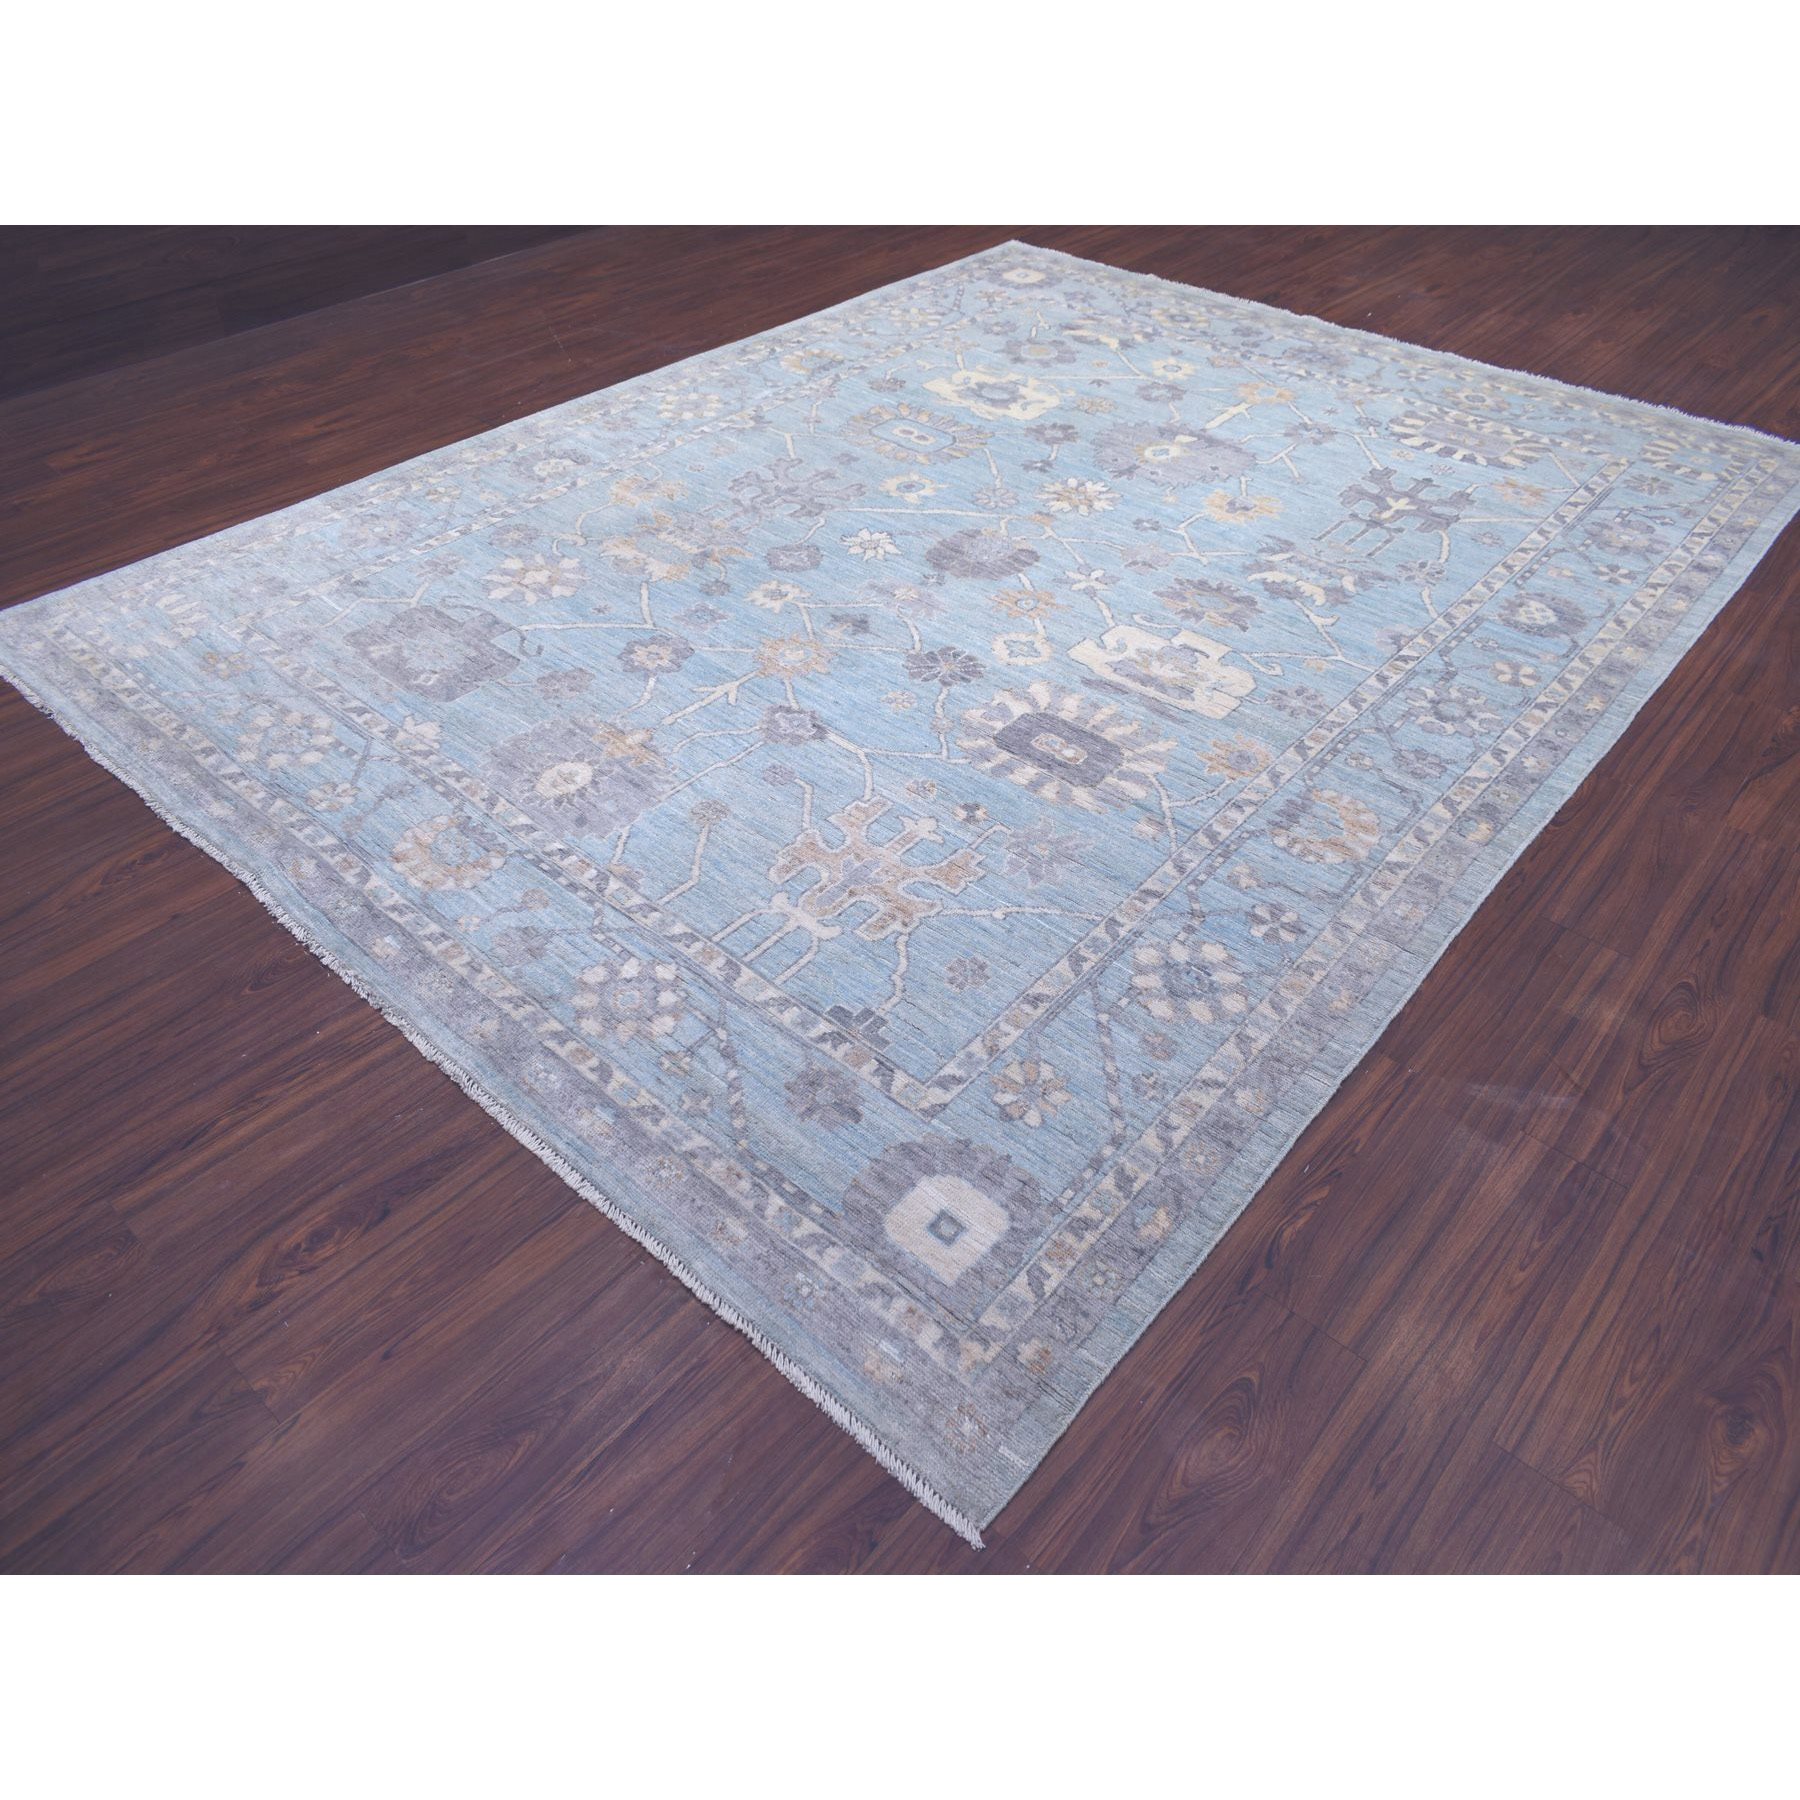 9'3"x12' Blue Angora Oushak All Over Motifs Natural Dyes, Afghan Wool Hand Woven Oriental Rug 